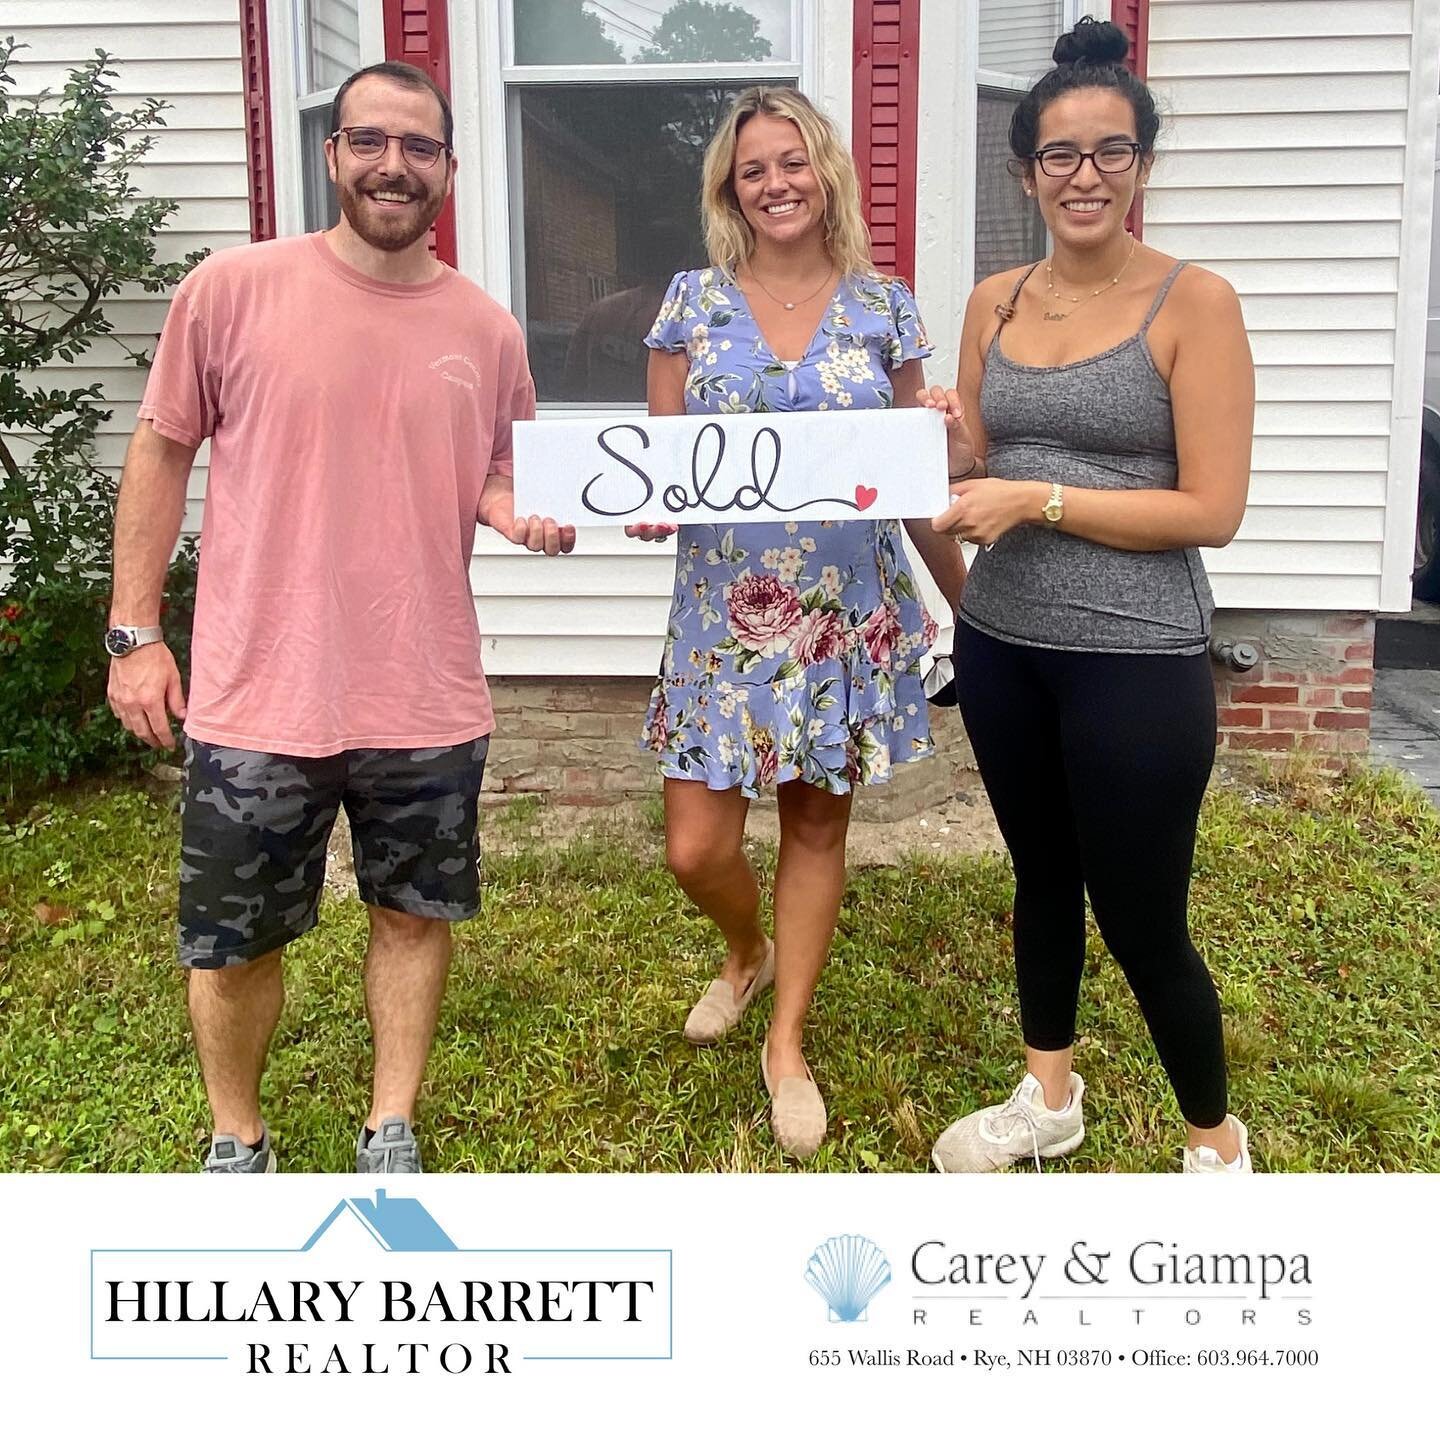 Happy days ahead for these homebuyers! It was an absolute pleasure teaming up with these two to find their first home. 

#firsttimehomebuyer #careyandgiamparealtors #newhampshirerealestate #exeternh #homebuying #buyersagent #realtor #nhrealestateagen